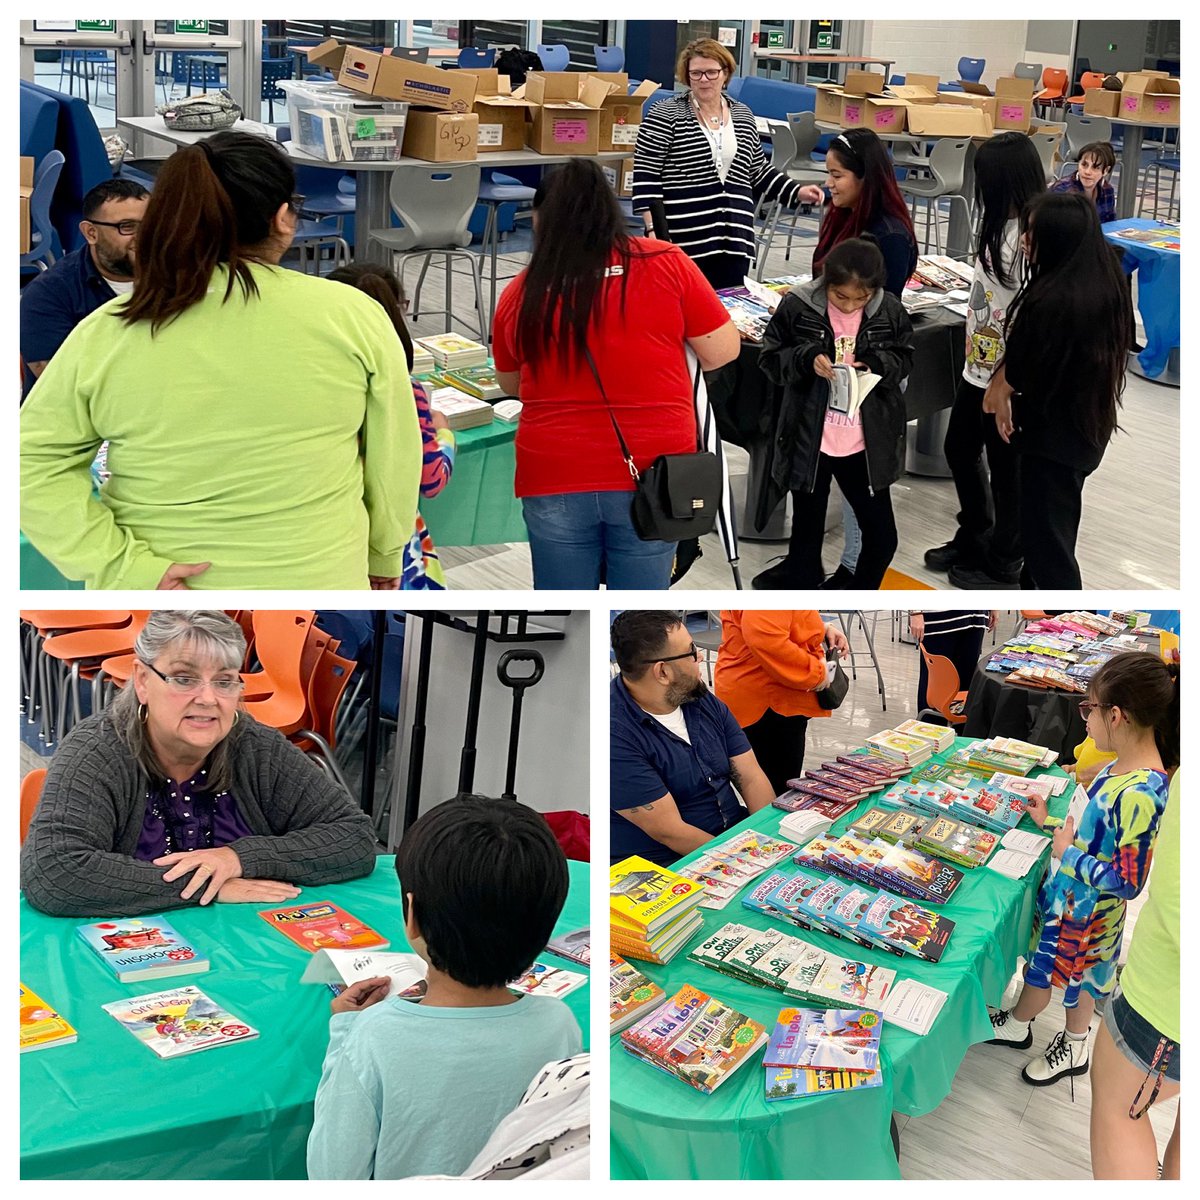 ✅ Spreading a love of reading ✅ Creating lifelong readers ✅ Building students’ home libraries ✅ Fun family time It was a night of genre tasting and book giveaways for @SAISD families at Burbank HS! @SAISDLibraries #saisdfamilia